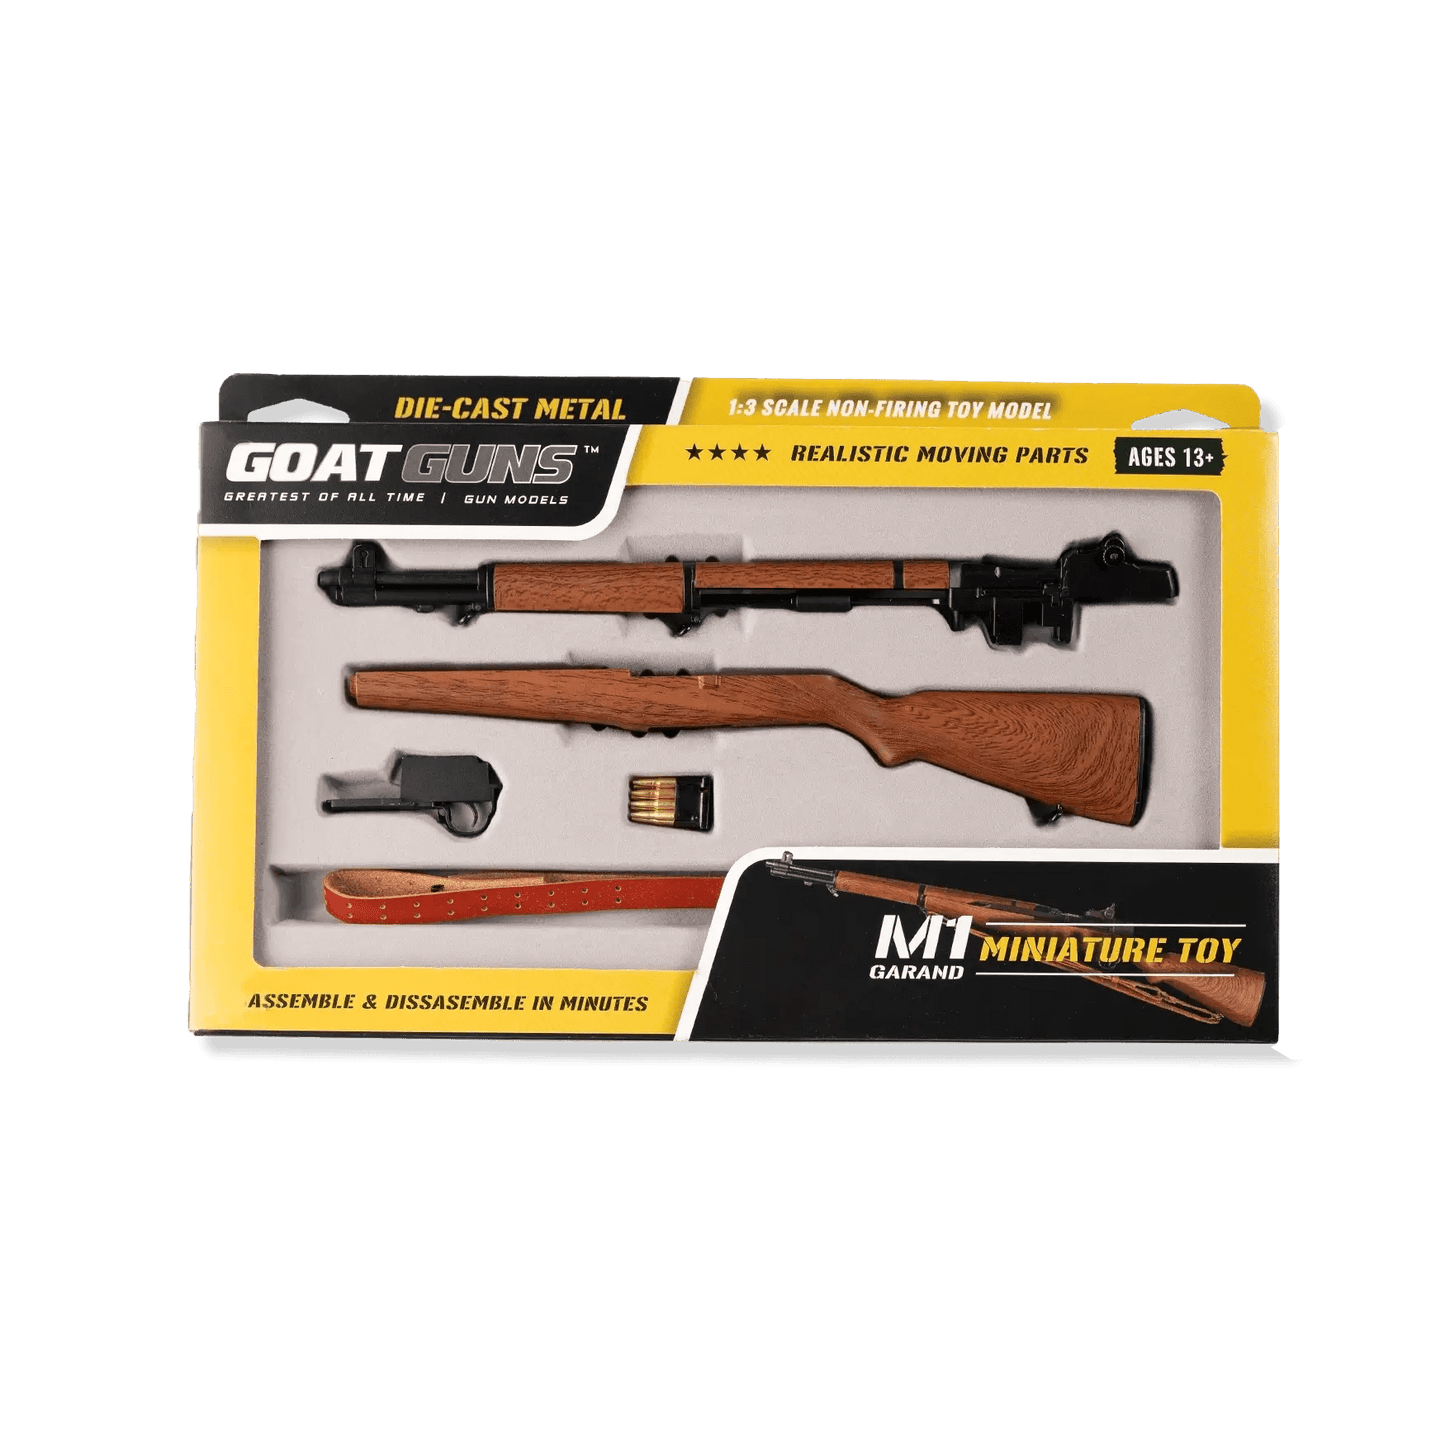 The Mini M1 Garand - Men's Gifts - Manly Bands